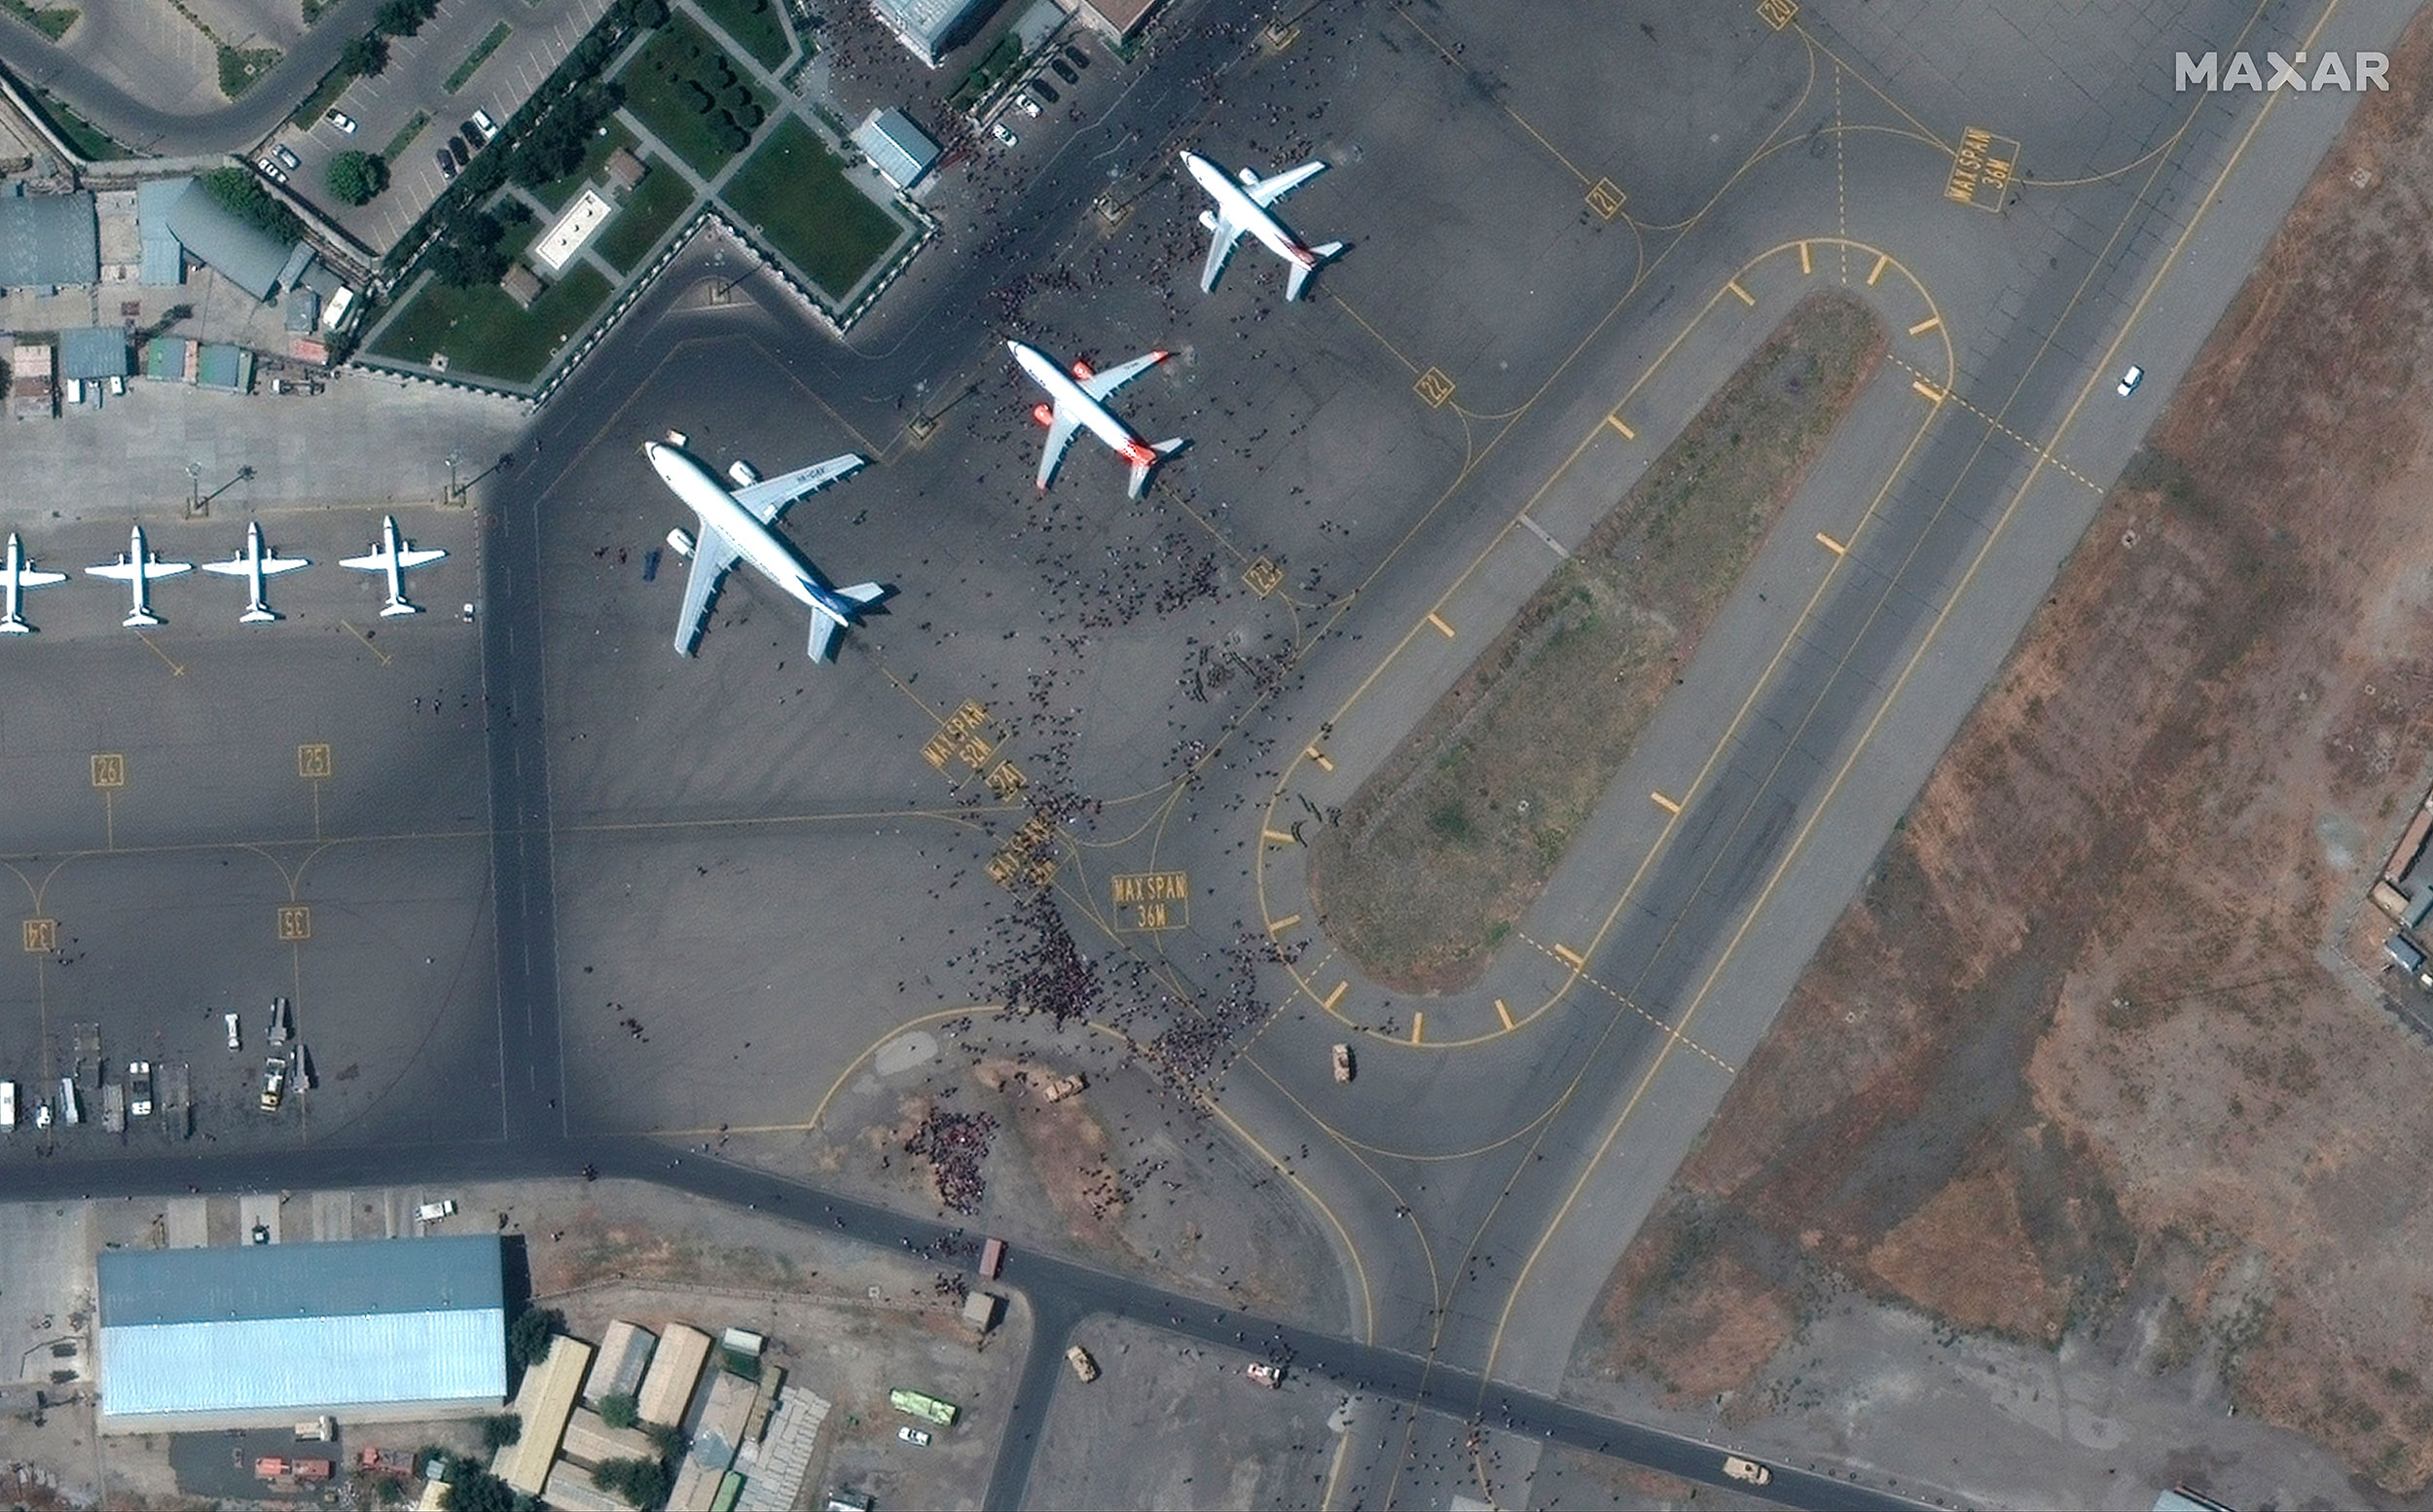 This satellite photo from Maxar Technologies shows swarms of people on the tarmac at Kabul International Airport, Monday August 16.